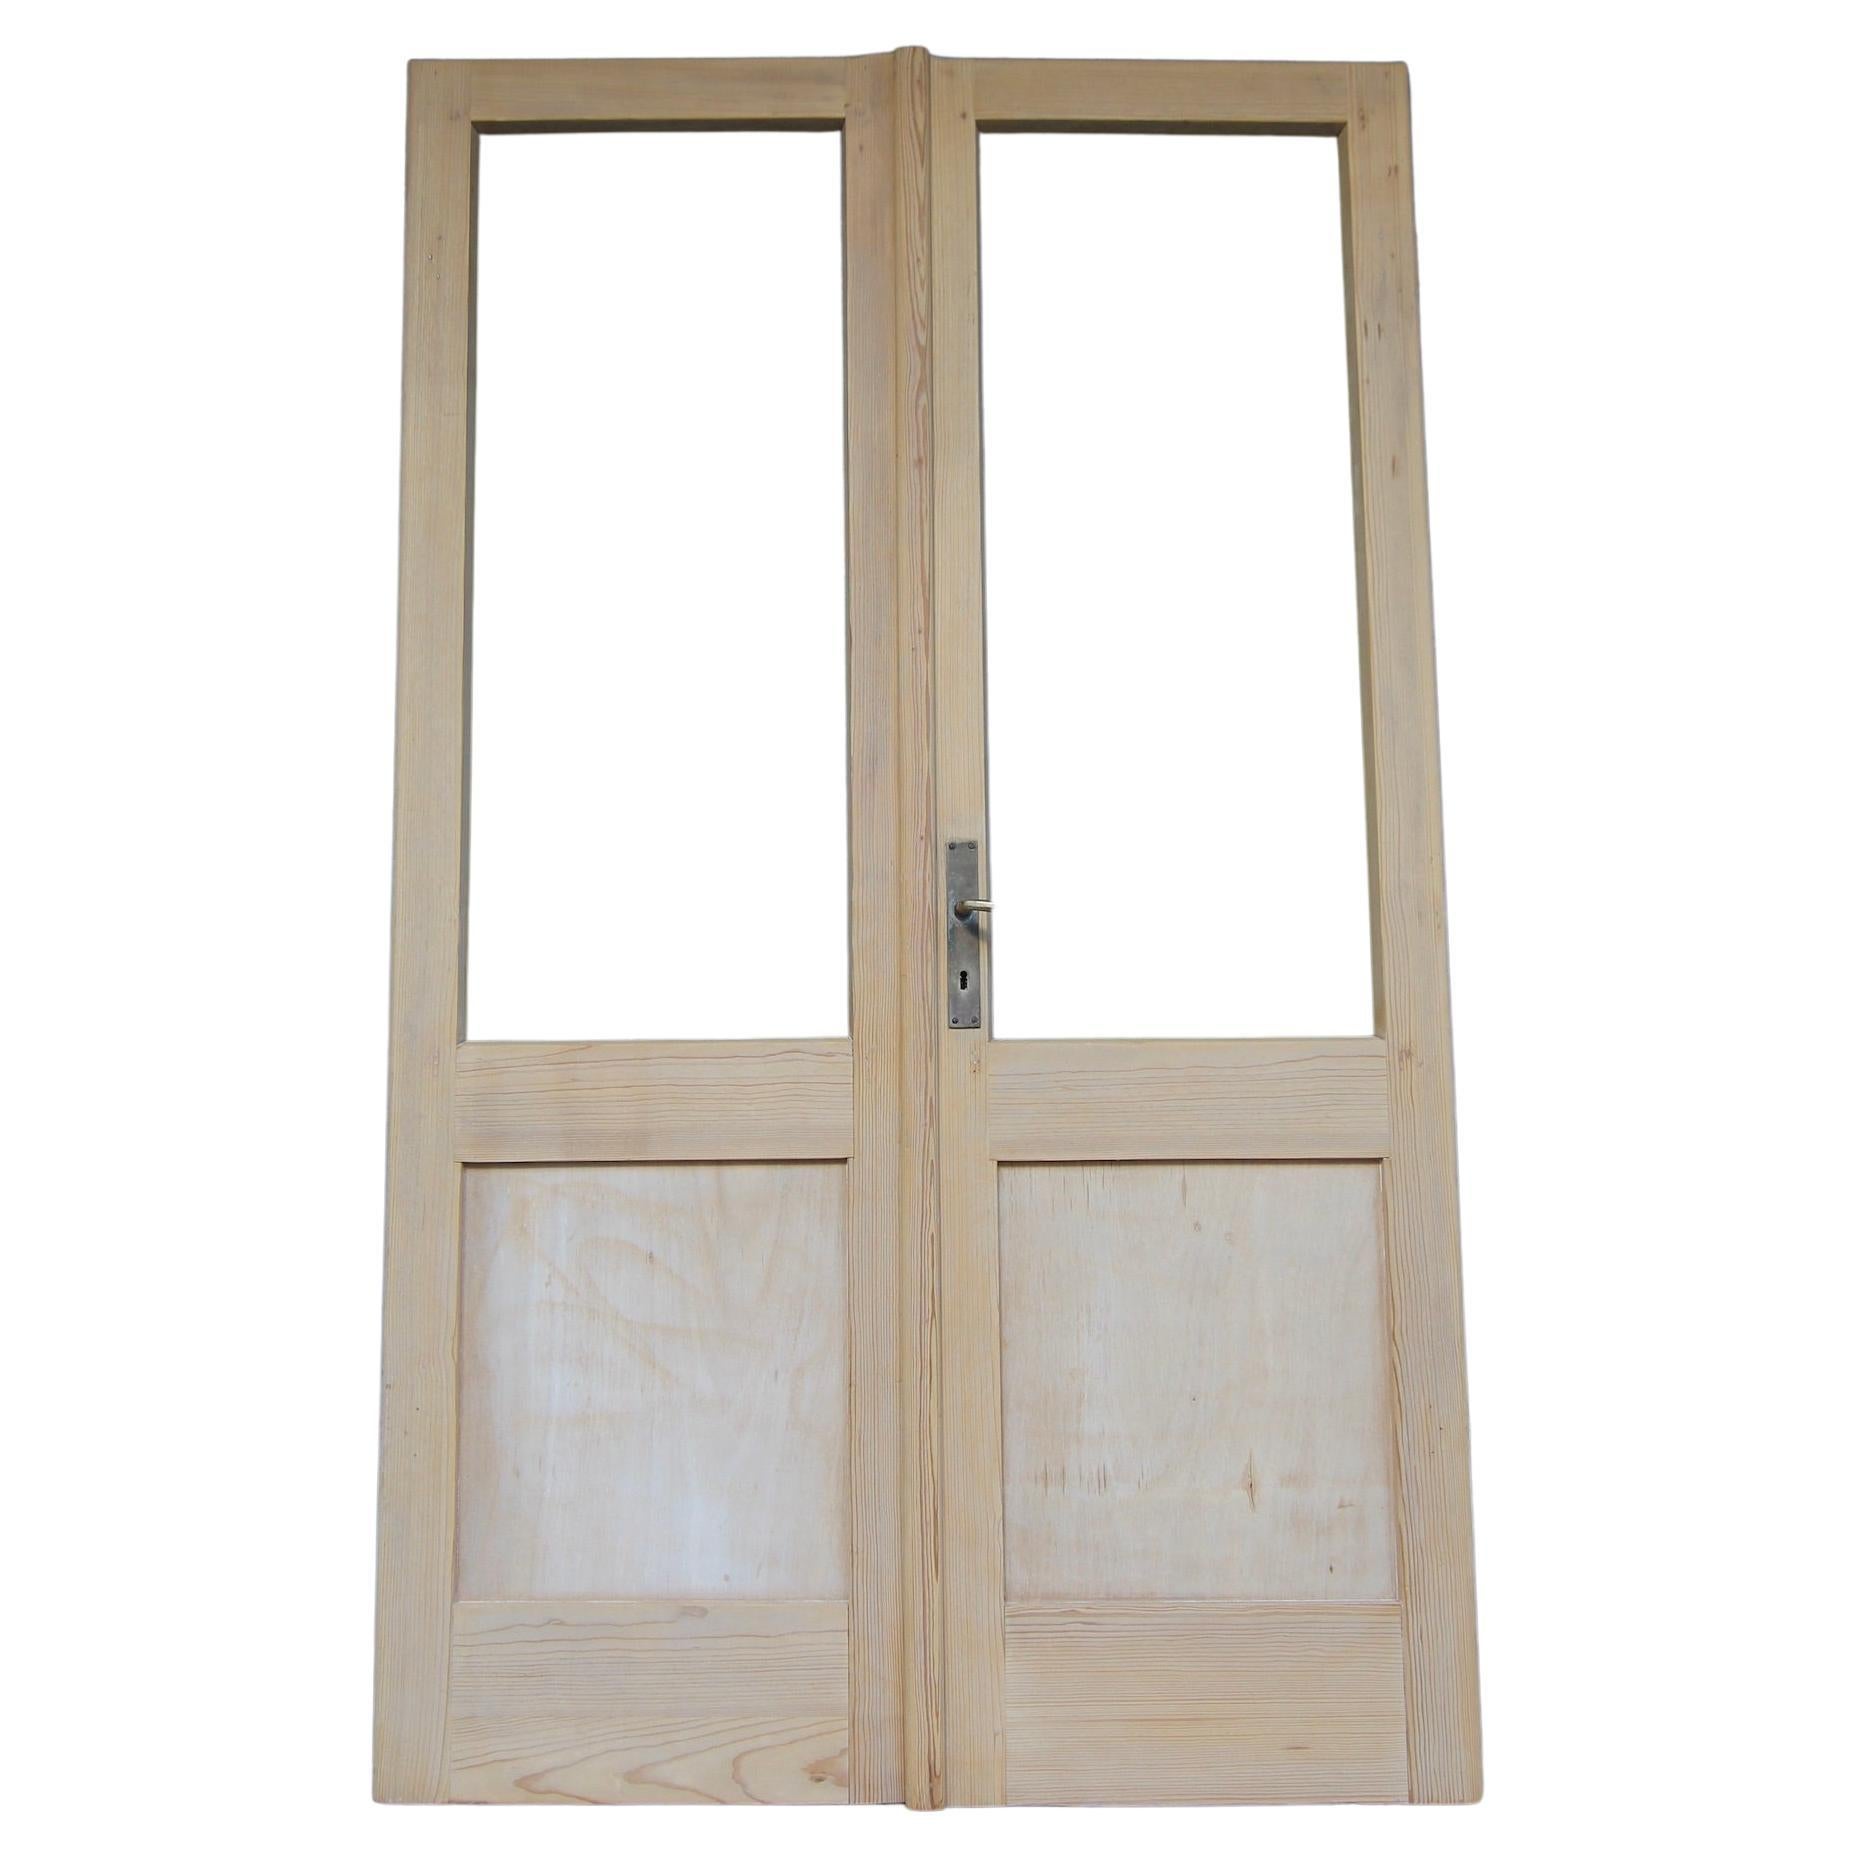 Early 20th Century Double Door made of Pine